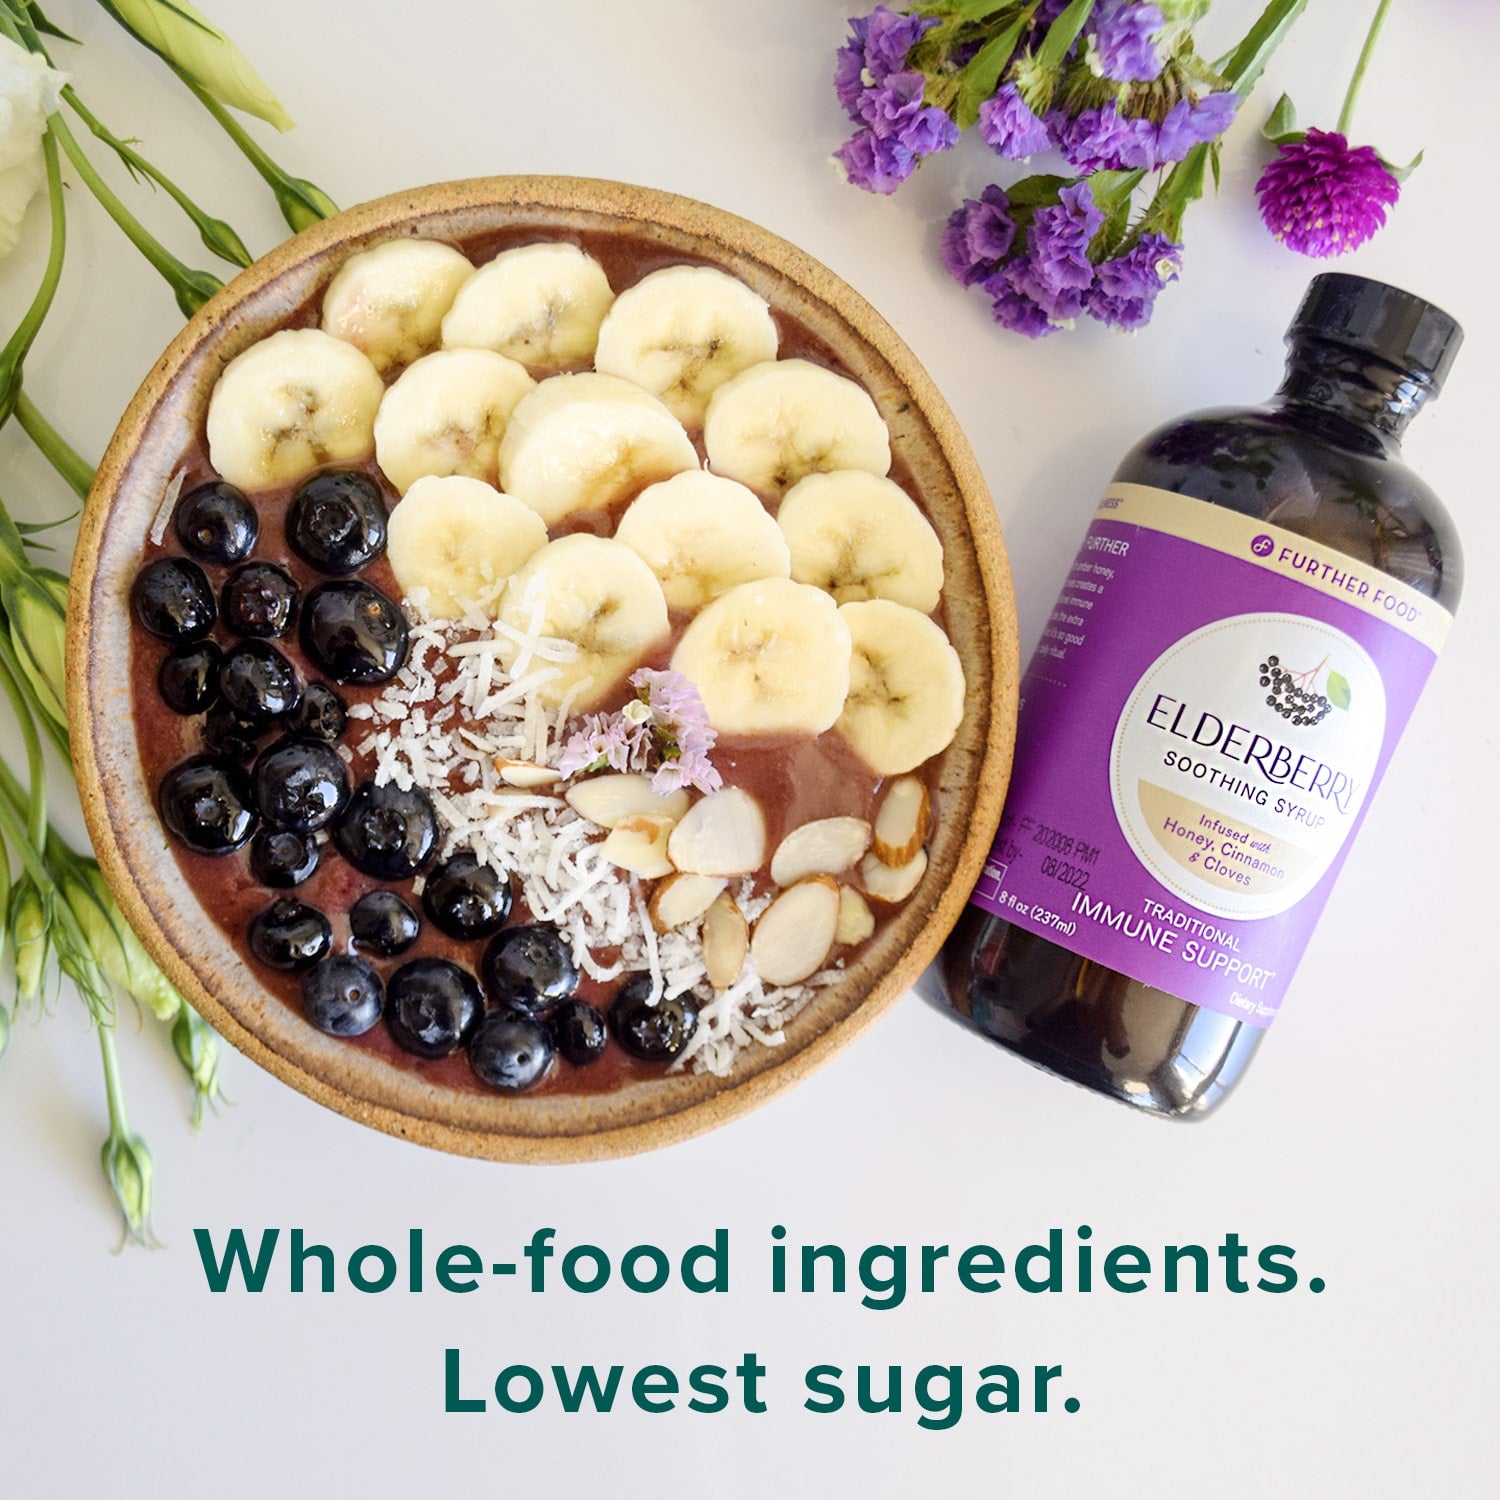 Our Elderberry Soothing Syrup has whole-food ingredients and the lowest sugar of syrup options